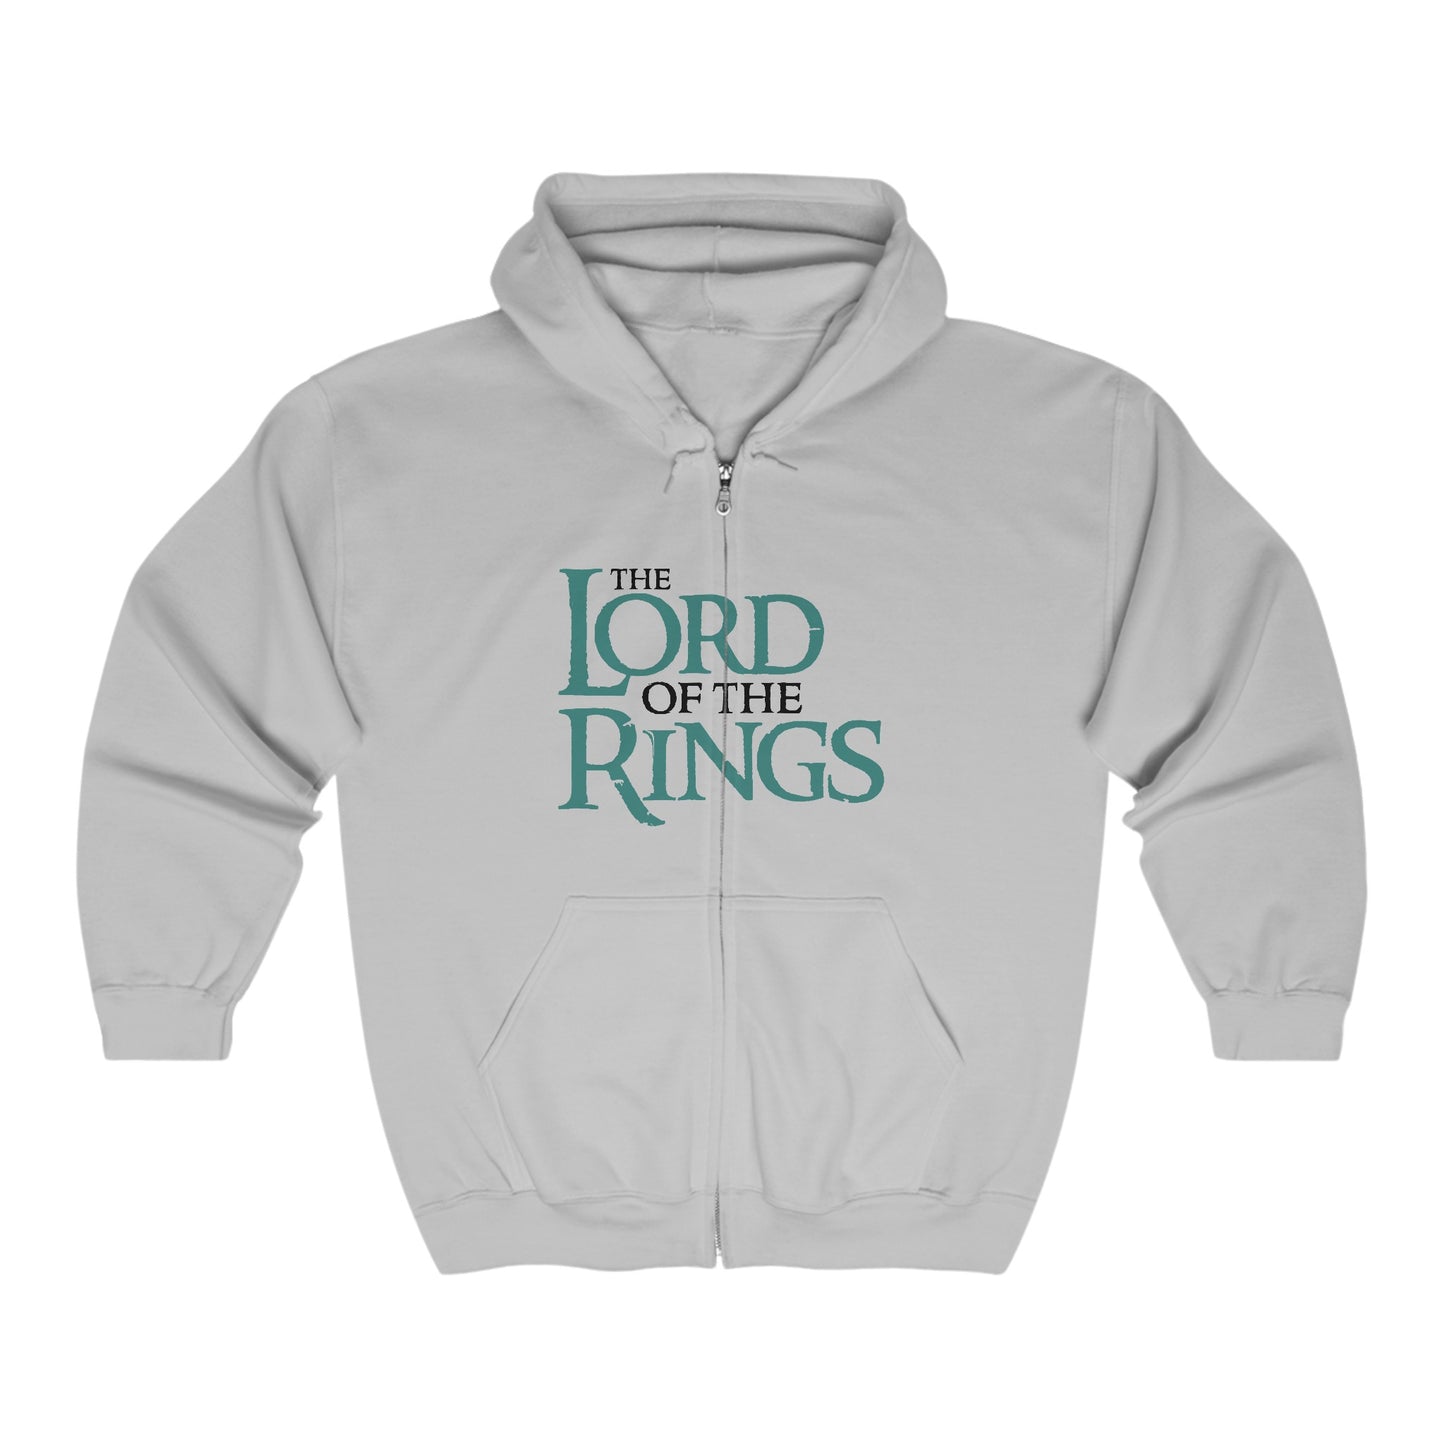 The Lord Of The Rings Zip-Up Hoodie